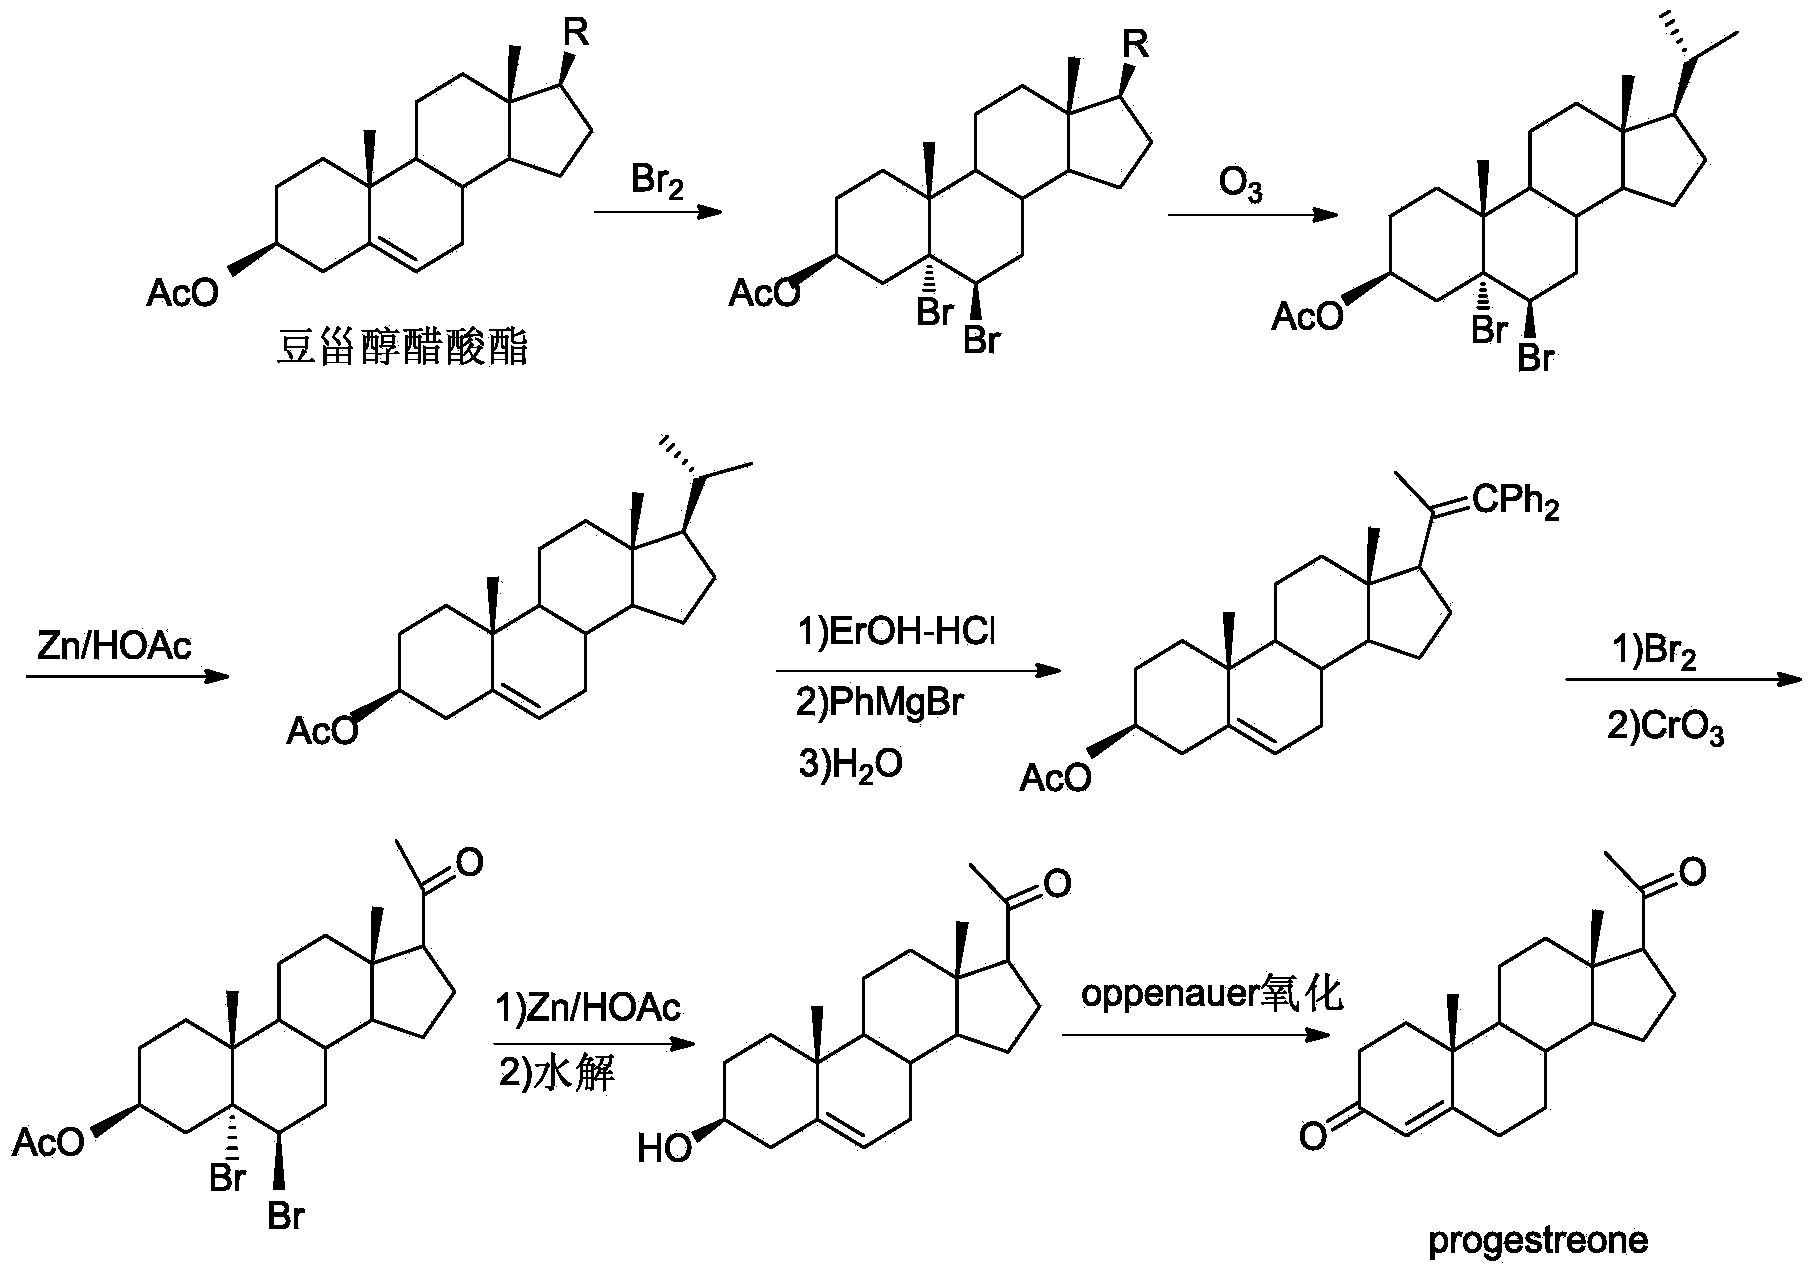 New technique for synthesizing progesterone